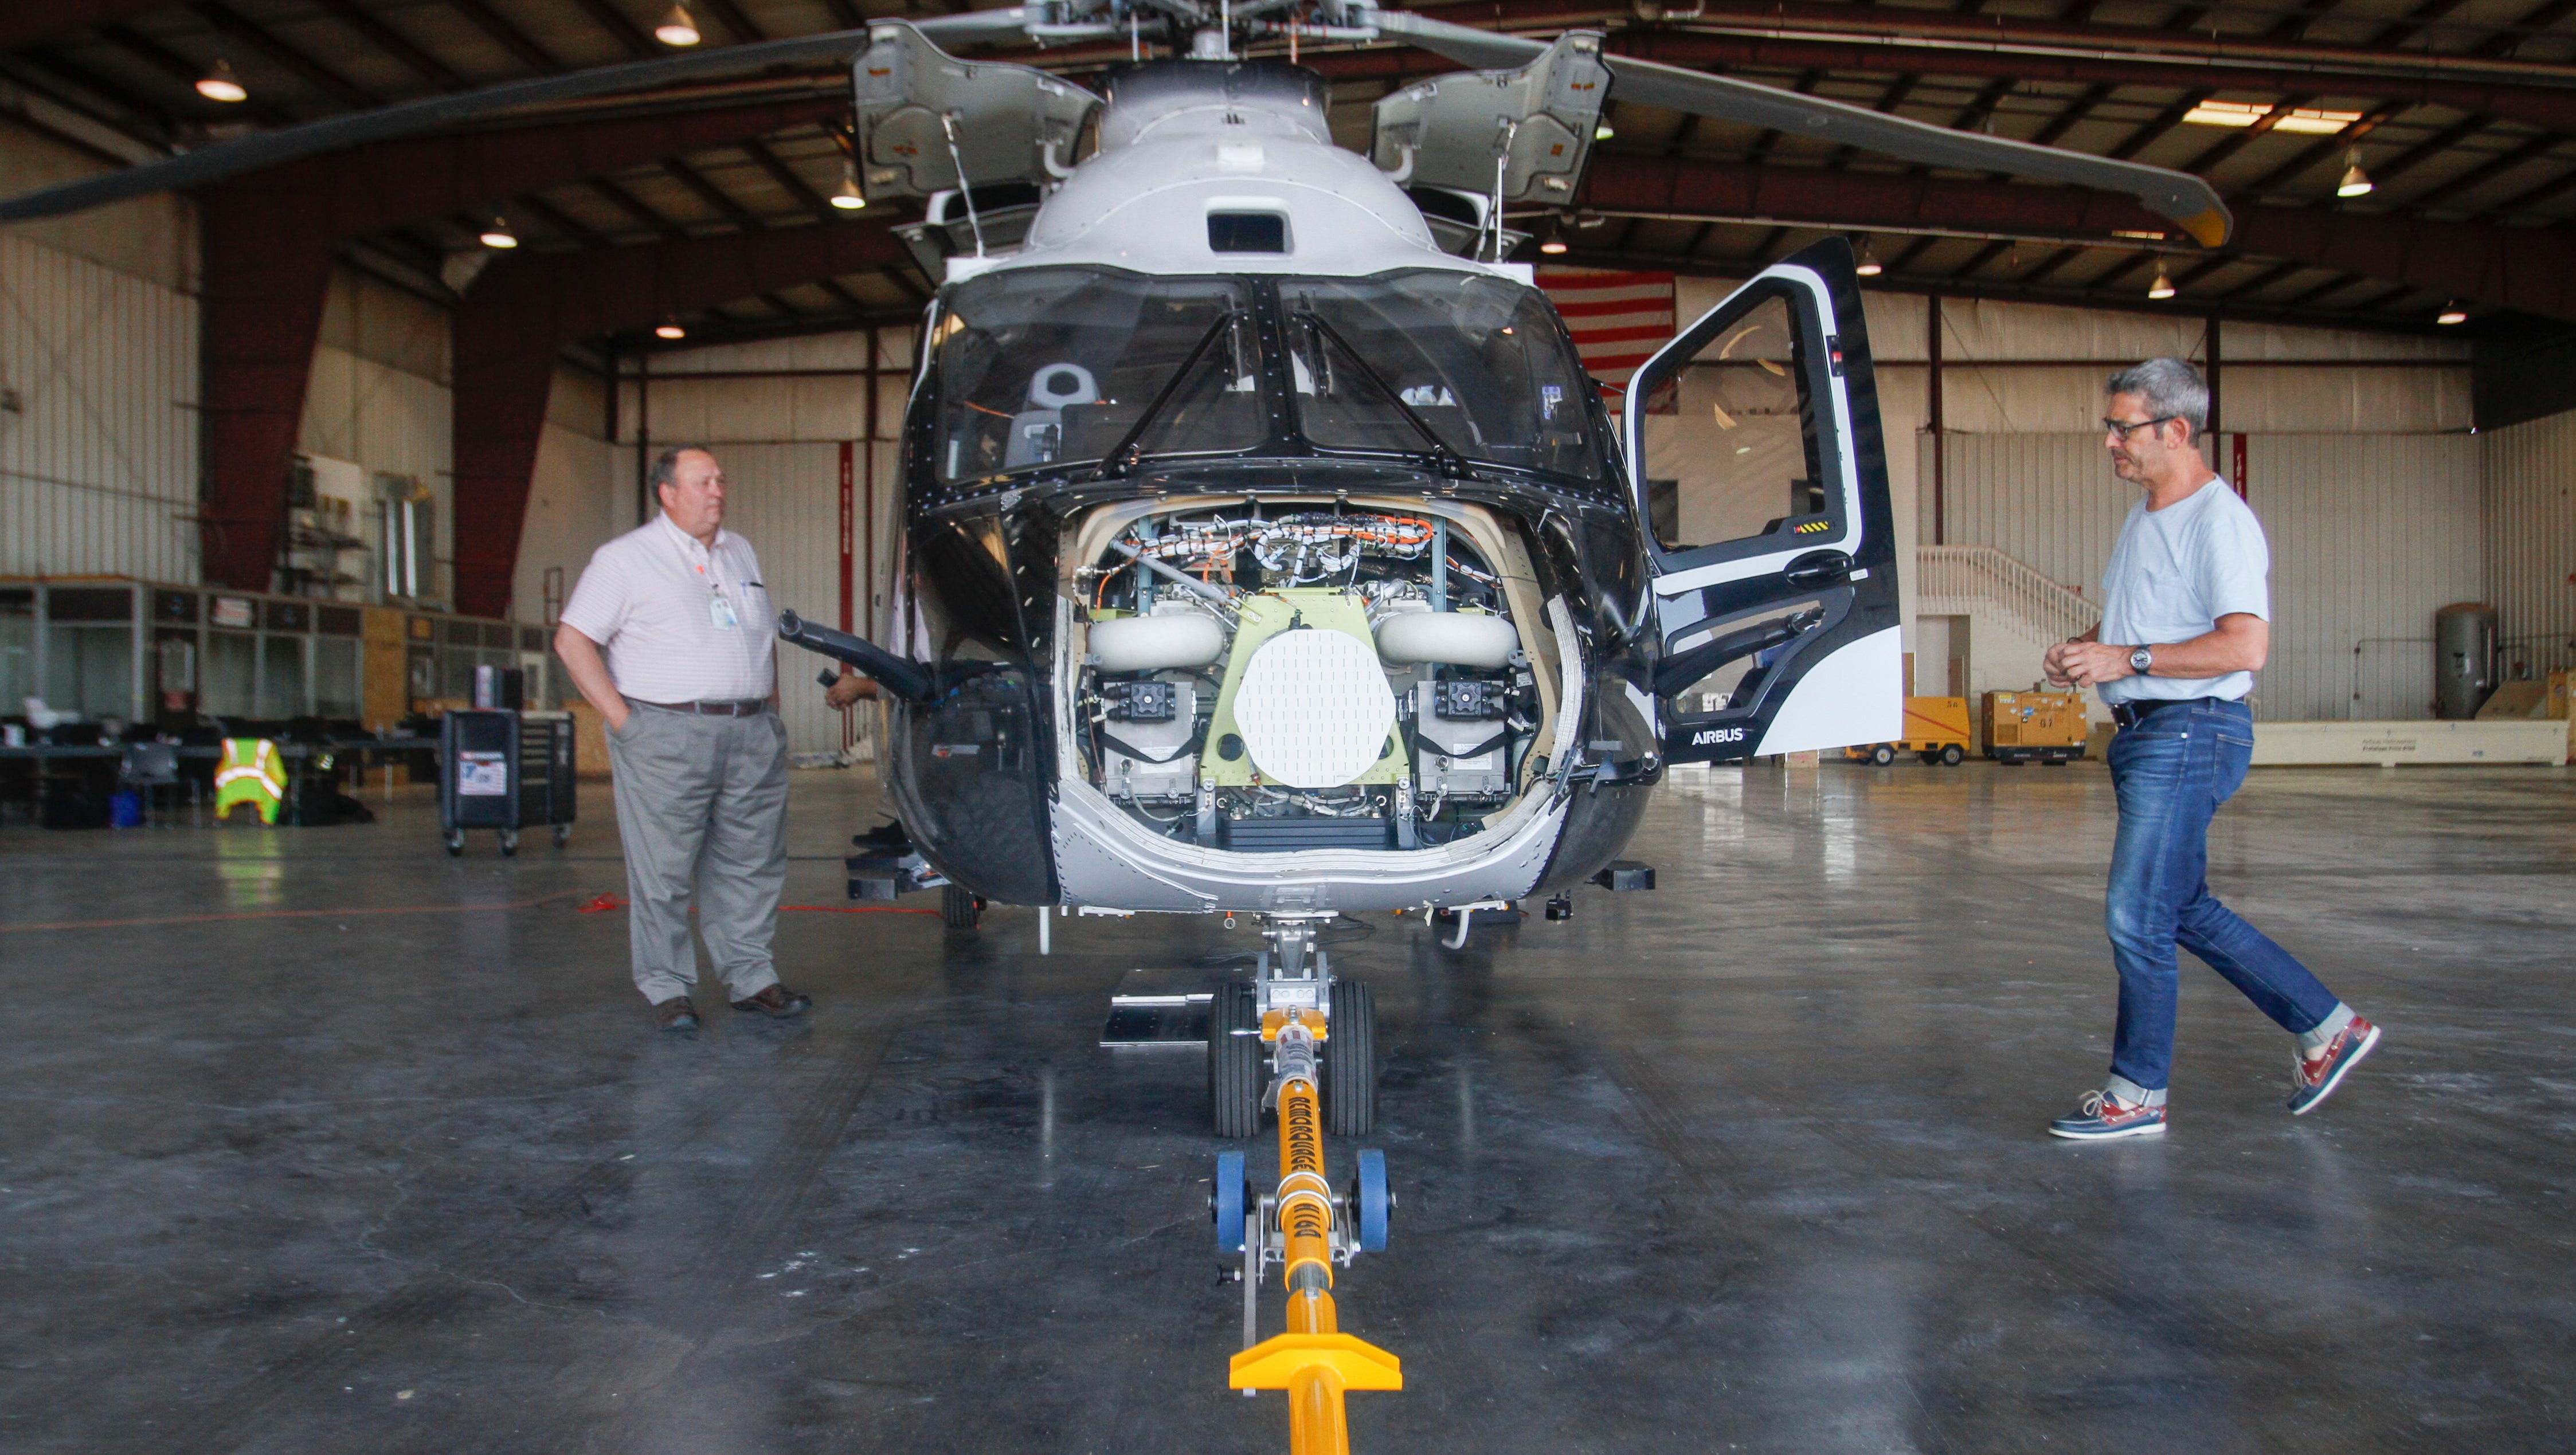 Mike Lewis, airport manager for the Four Corners Regional Airport, left, looks over the Airbus H160 helicopter as Pascal Jervaise, a support analyst for Airbus Helicopters, works Tuesday at the Four Corners Regional Airport in Farmington.